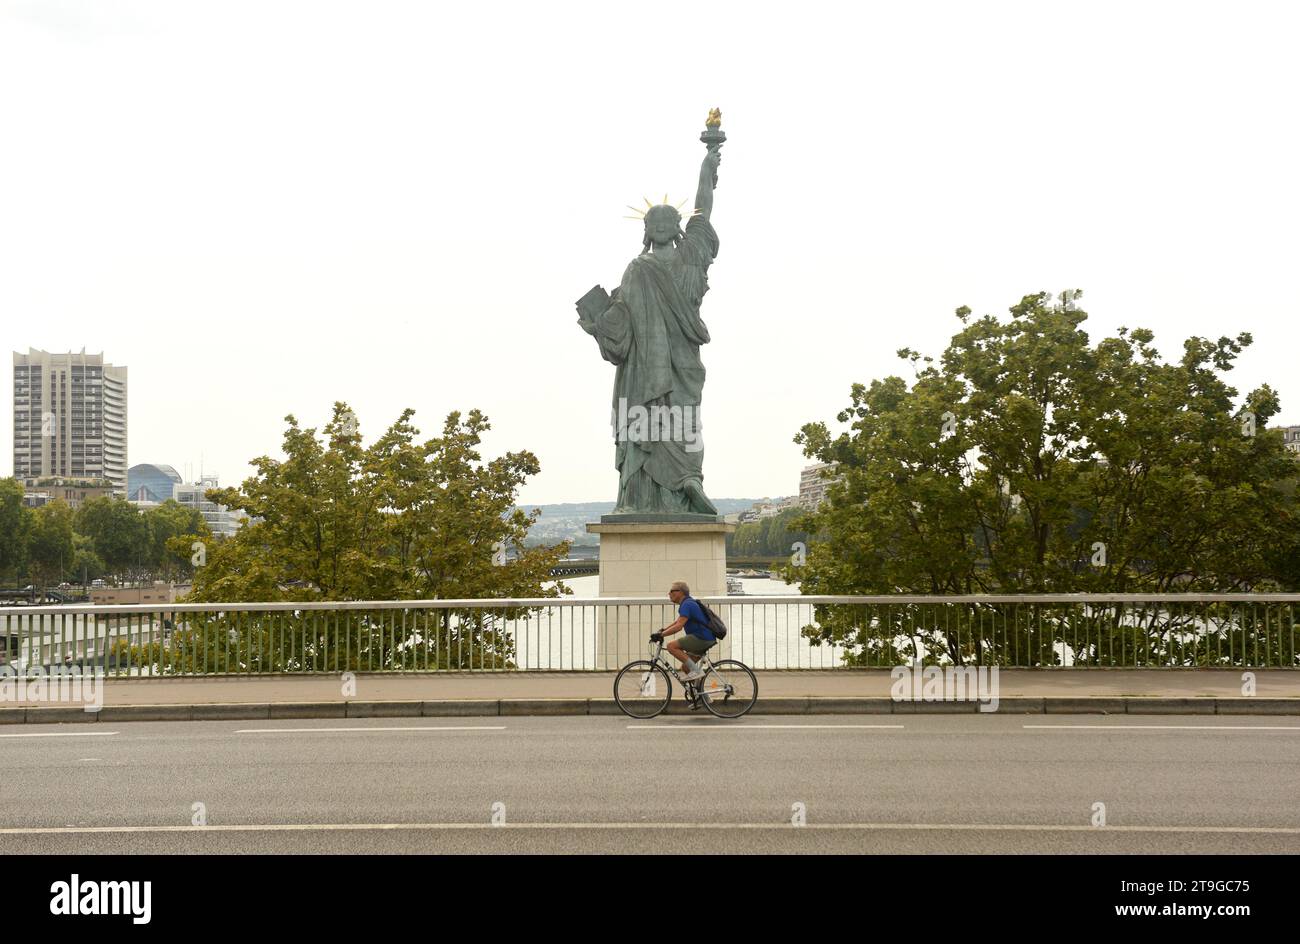 Paris, France - August 28, 2019: Statue of Liberty in Paris. The replica Statue of Liberty located on Pont de Grenelle in Paris, France. Stock Photo